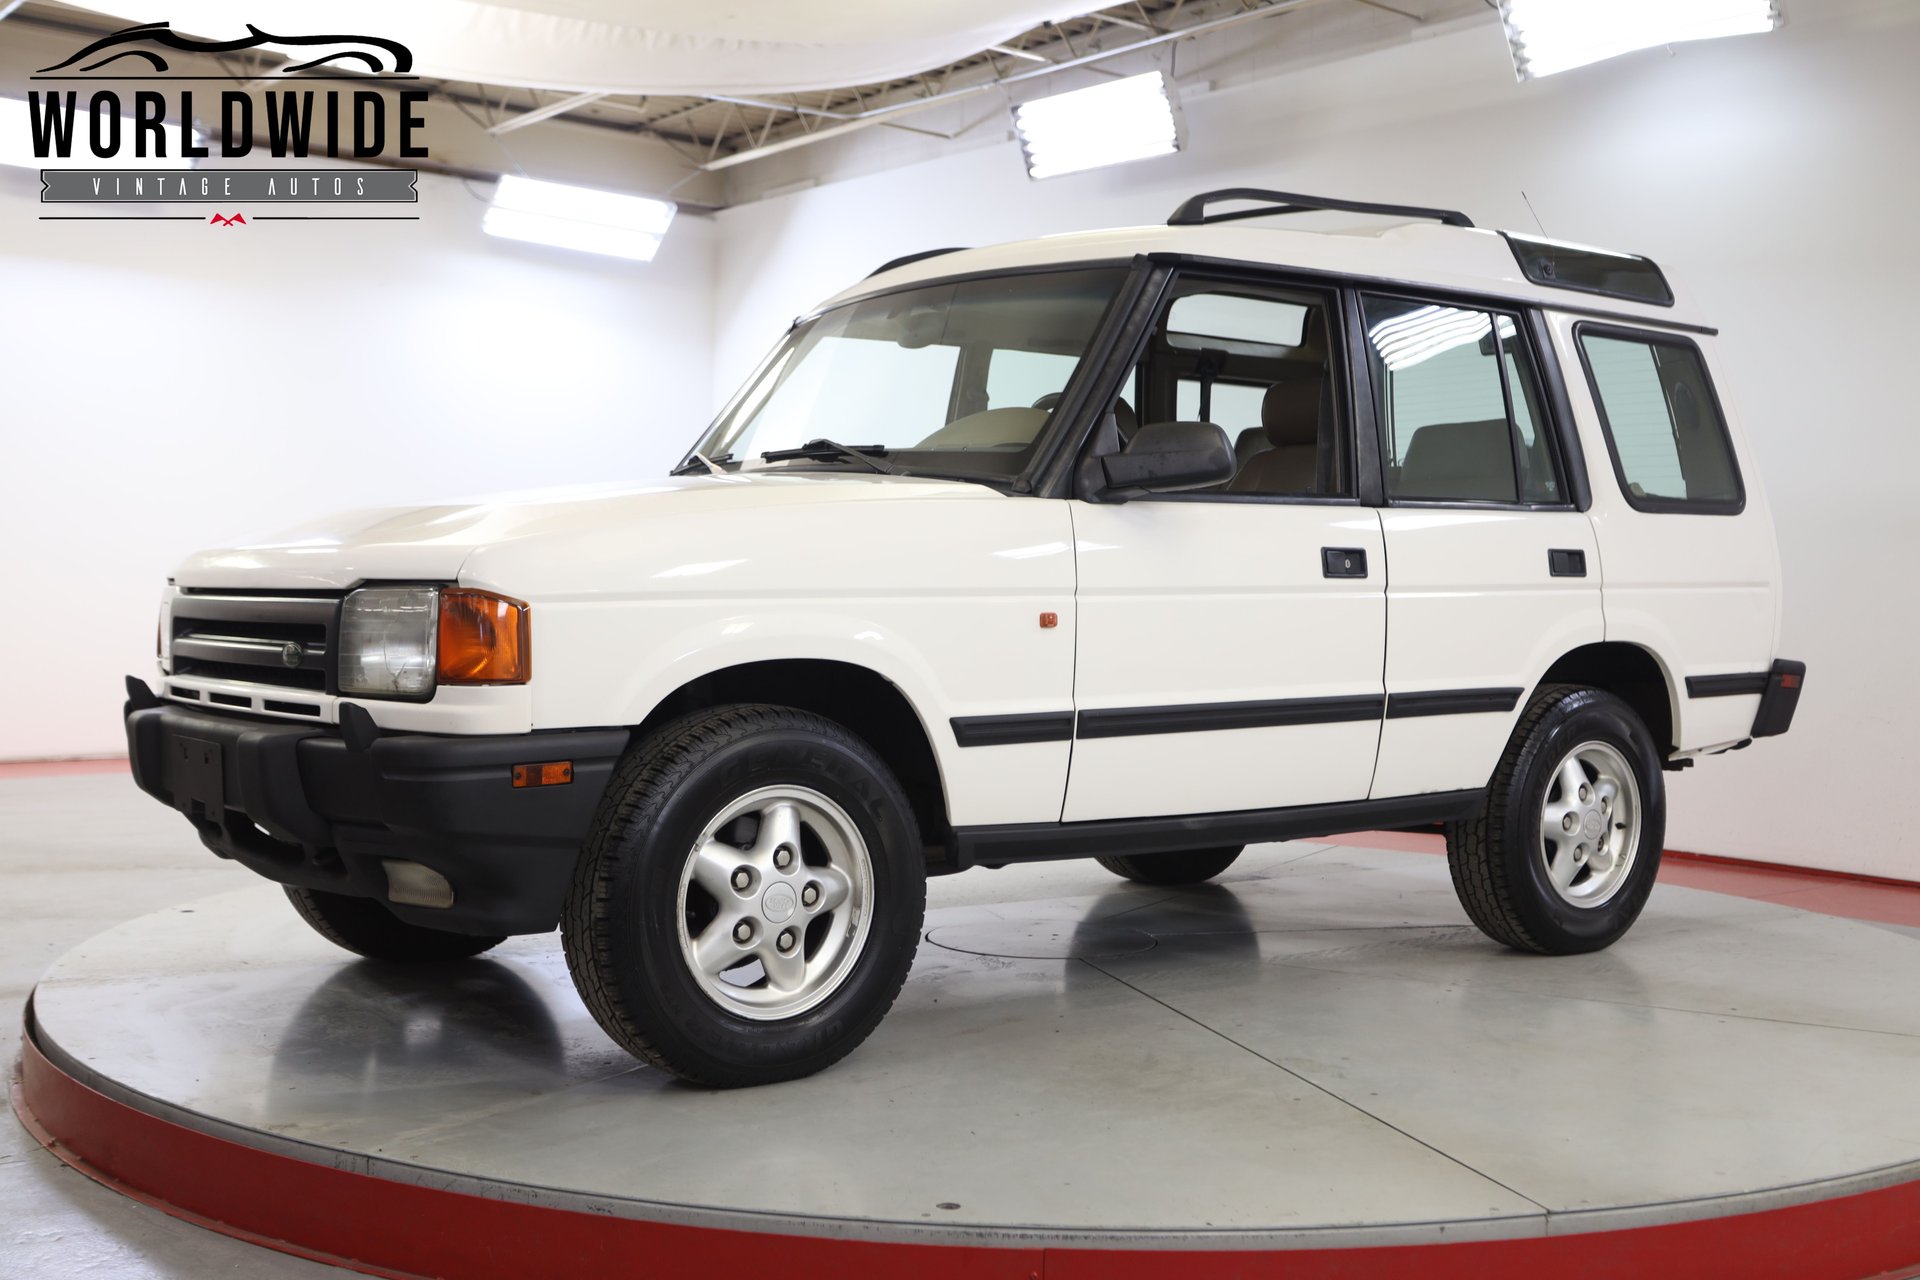 1996 Land Rover Discovery | Worldwide Vintage Autos